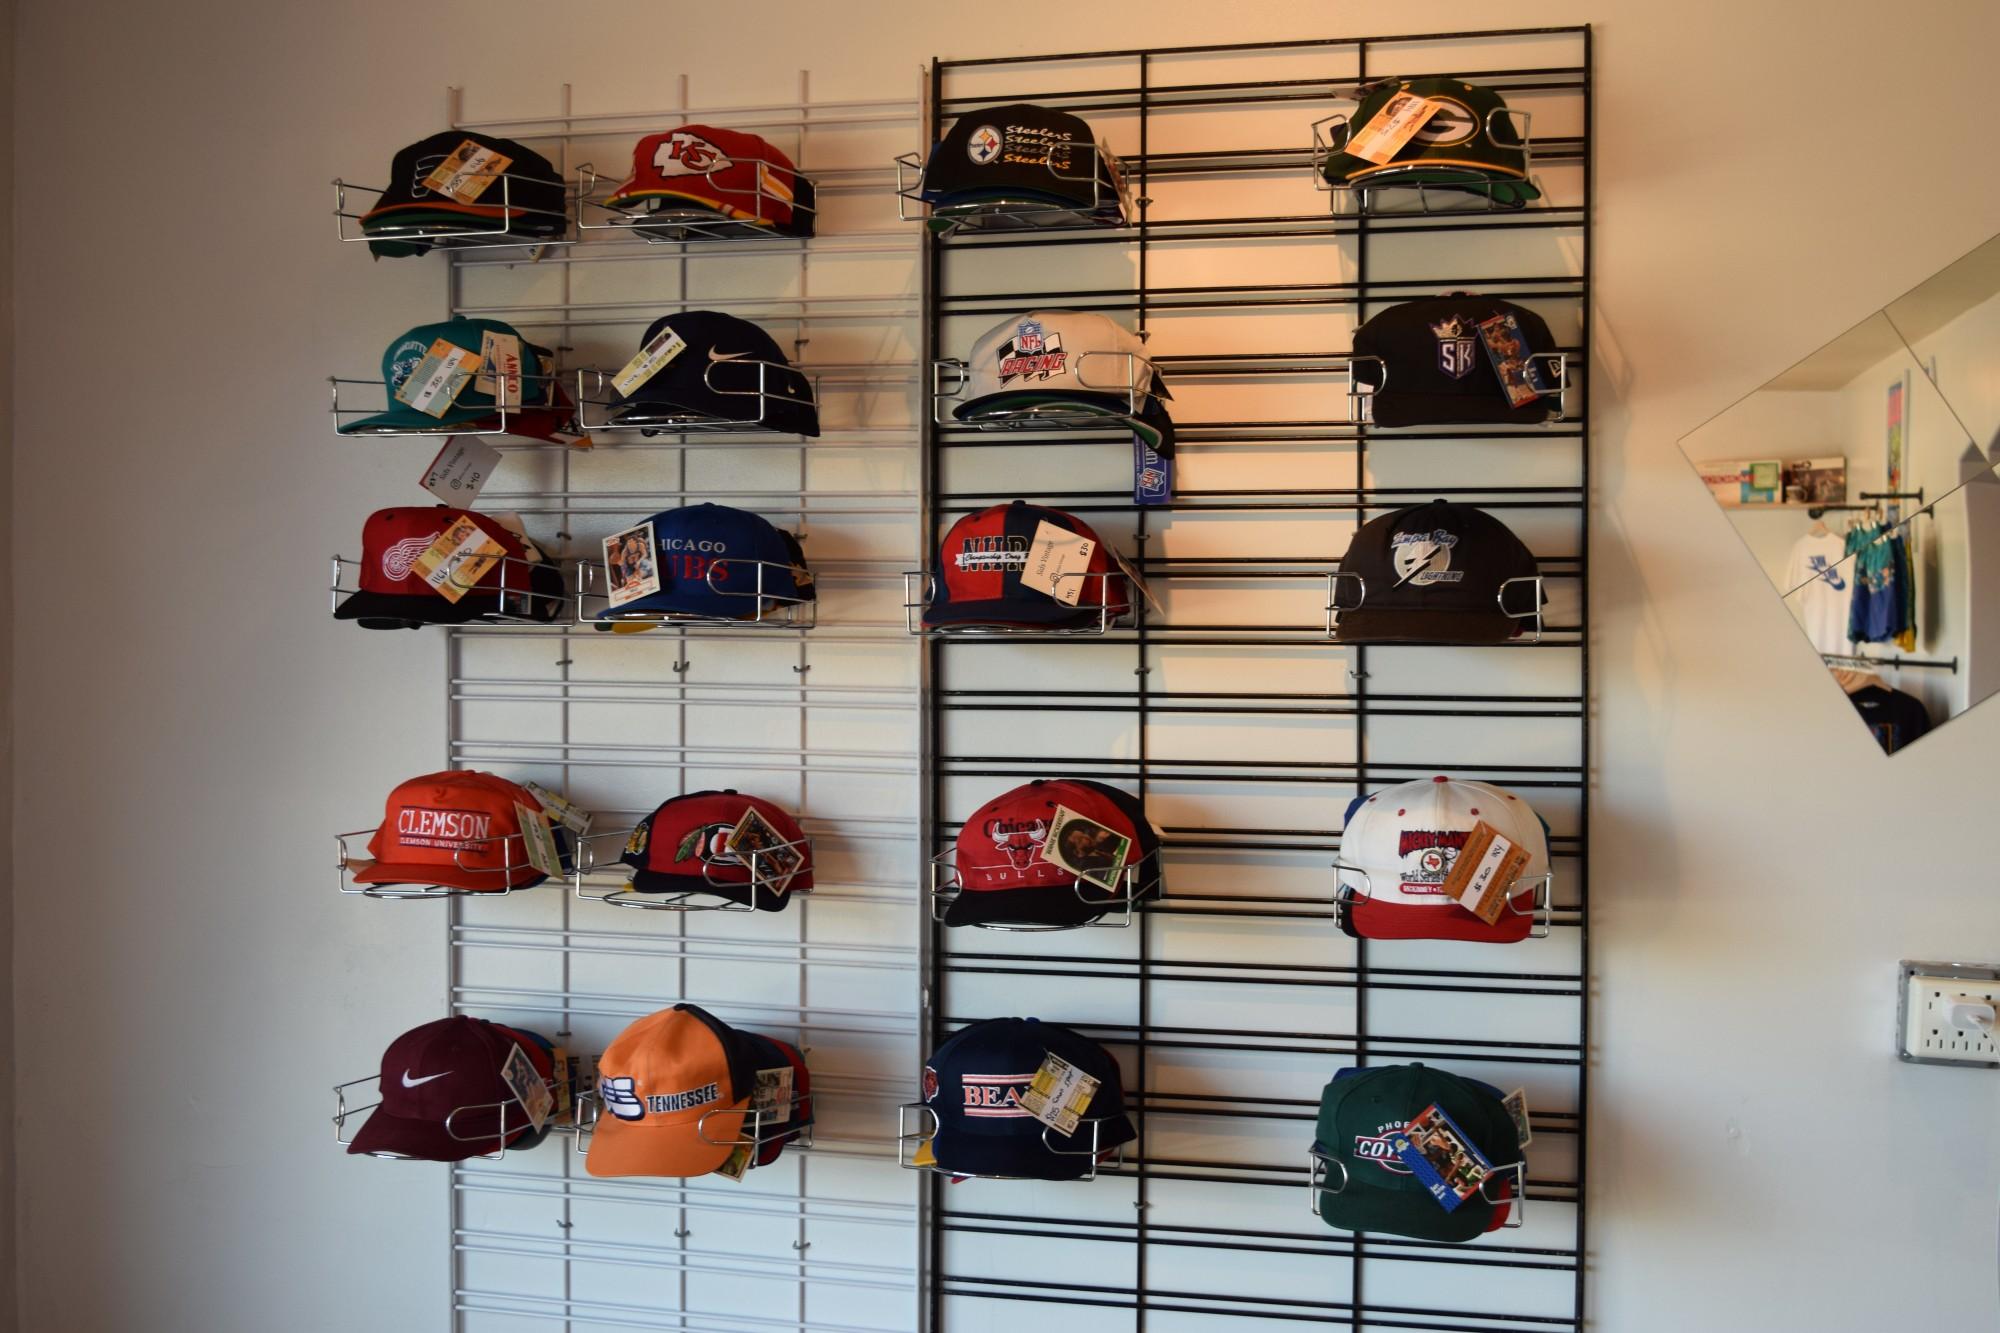 Vintage hats on display for sale at Sids Vintage located at 1832 E Sixth St. in Tucson, Arizona. The store sells sourced vintage apparel.